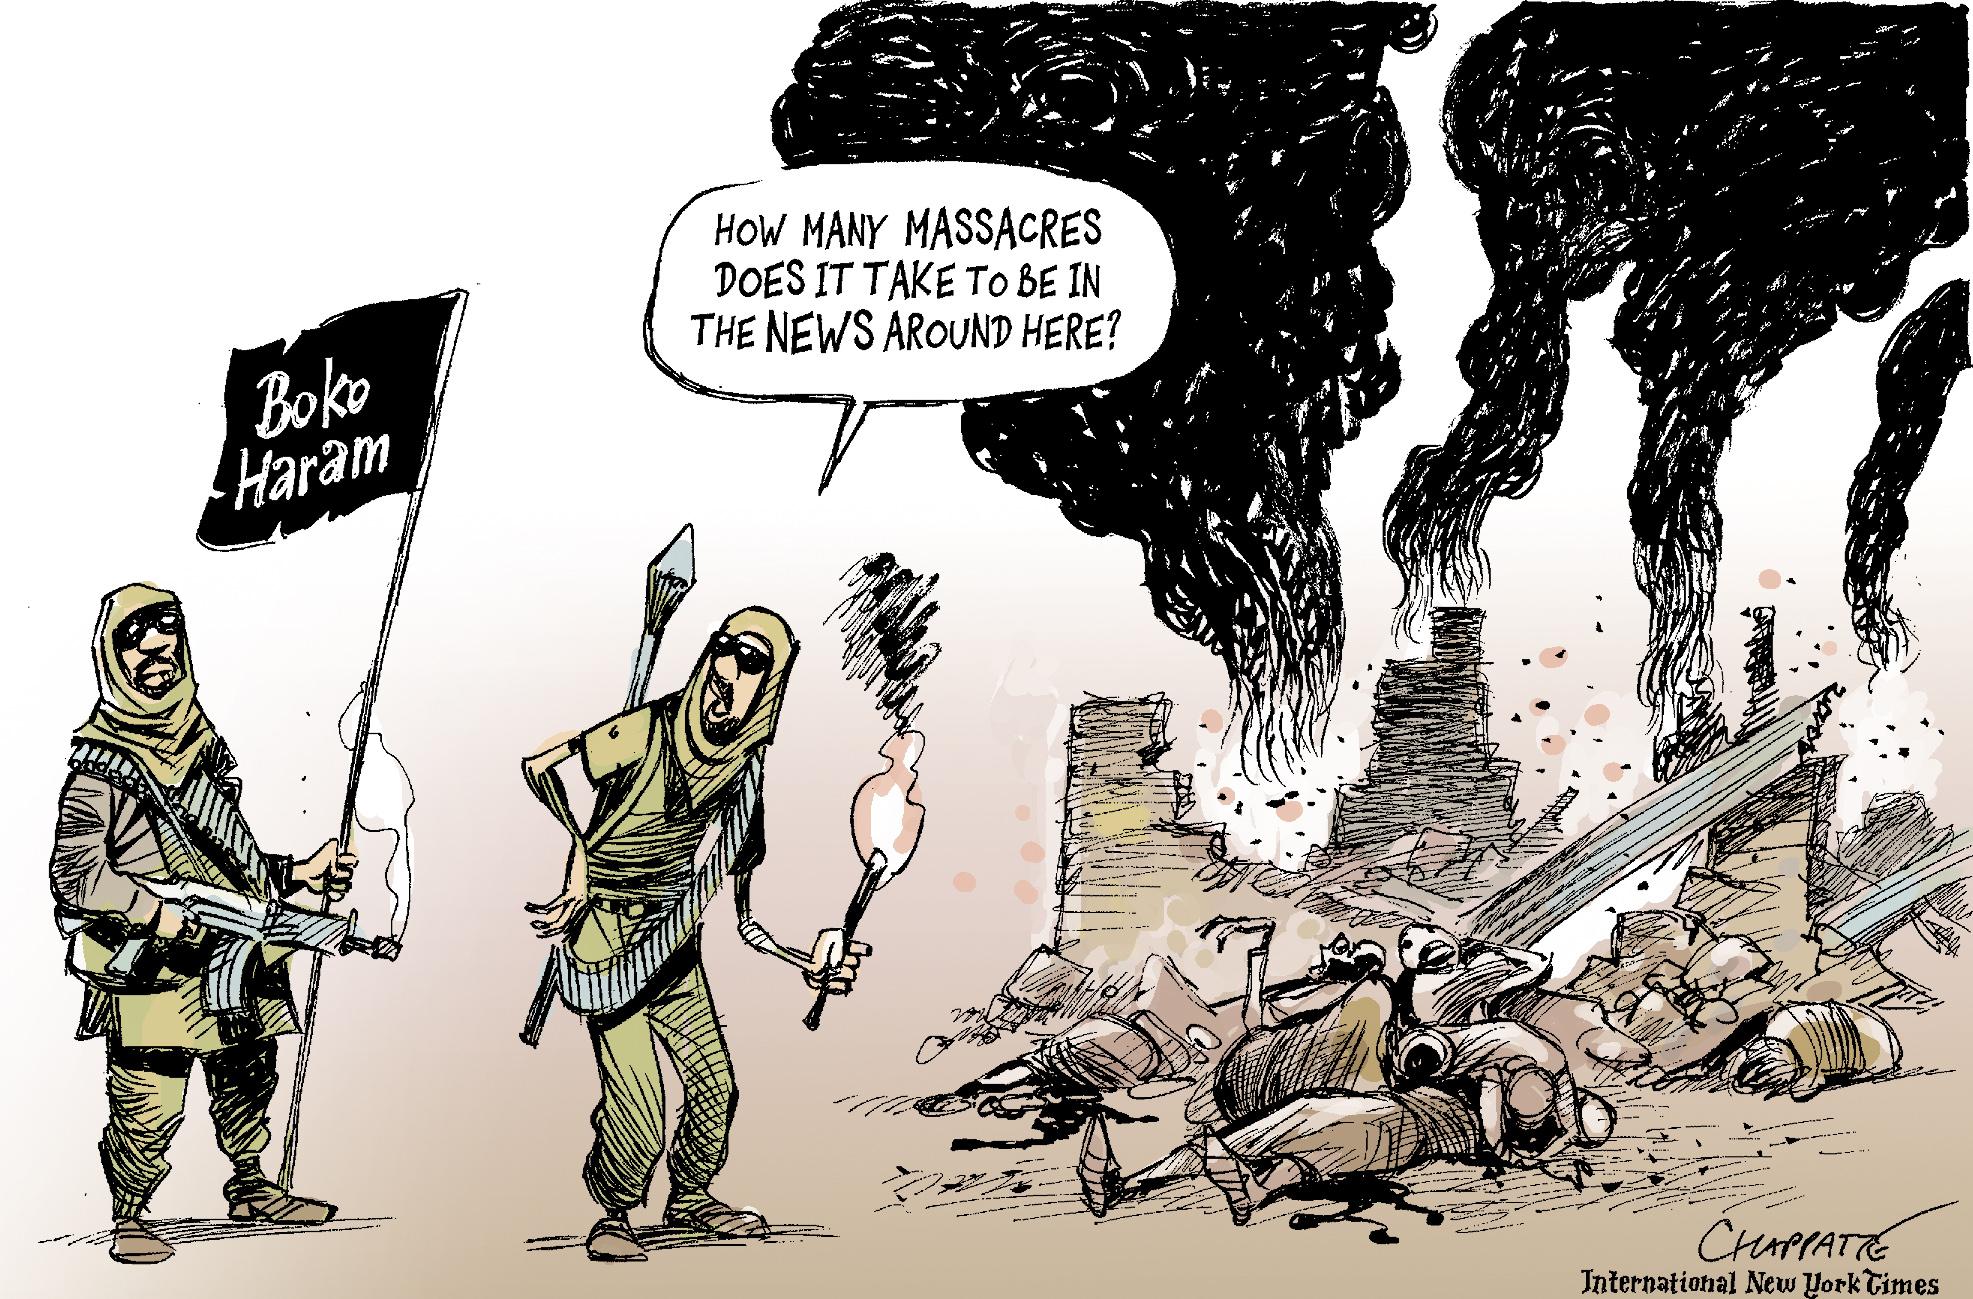 Boko Haram on a rampage